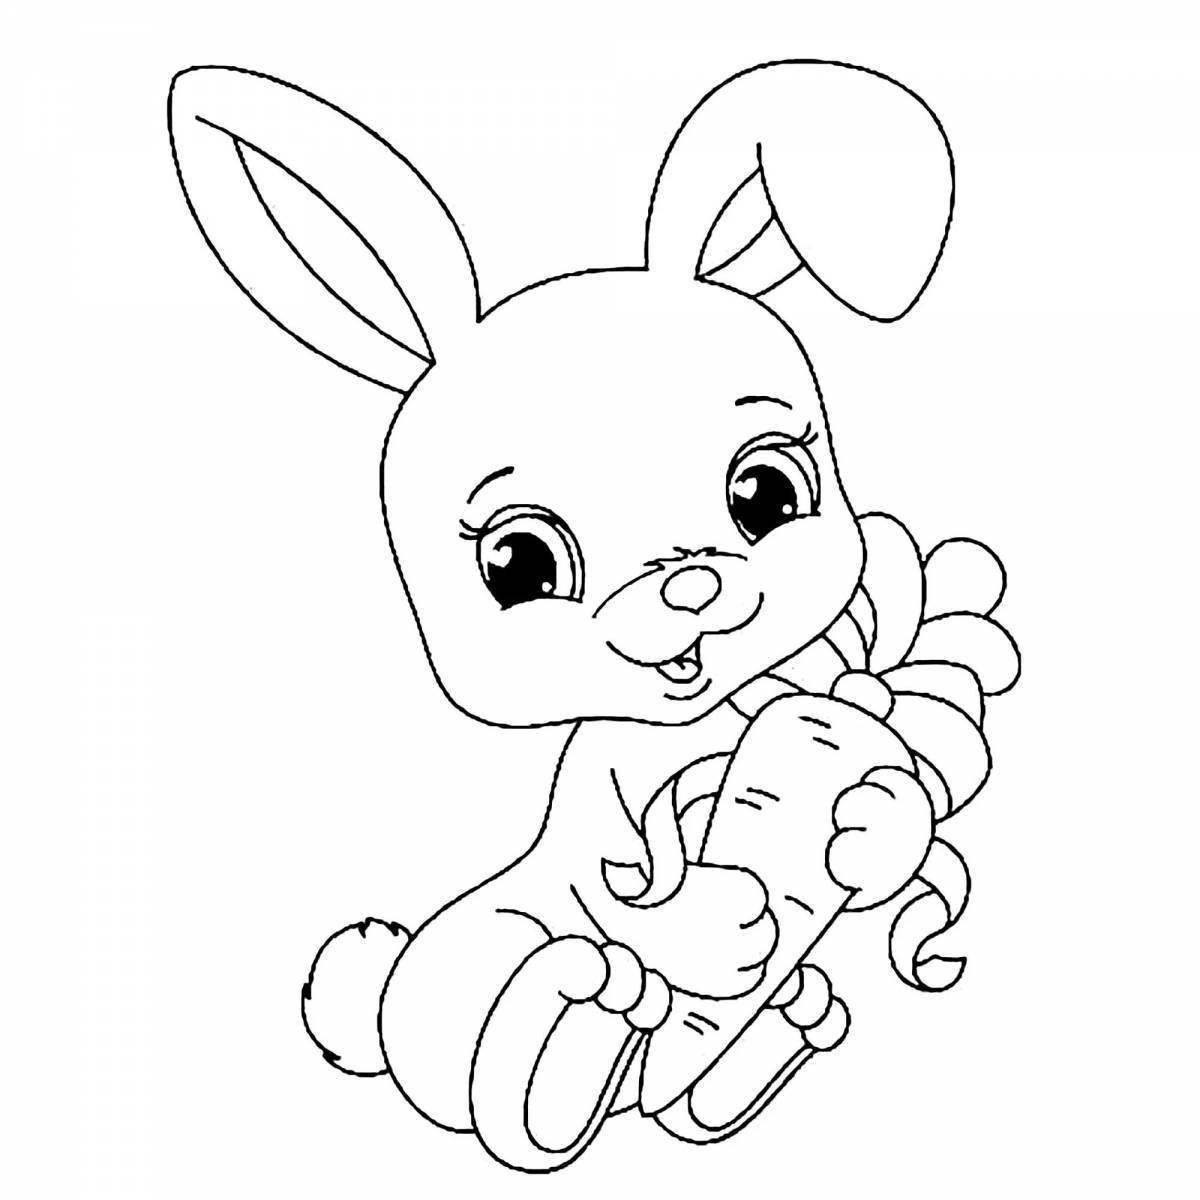 Snuggly coloring page baby bunny